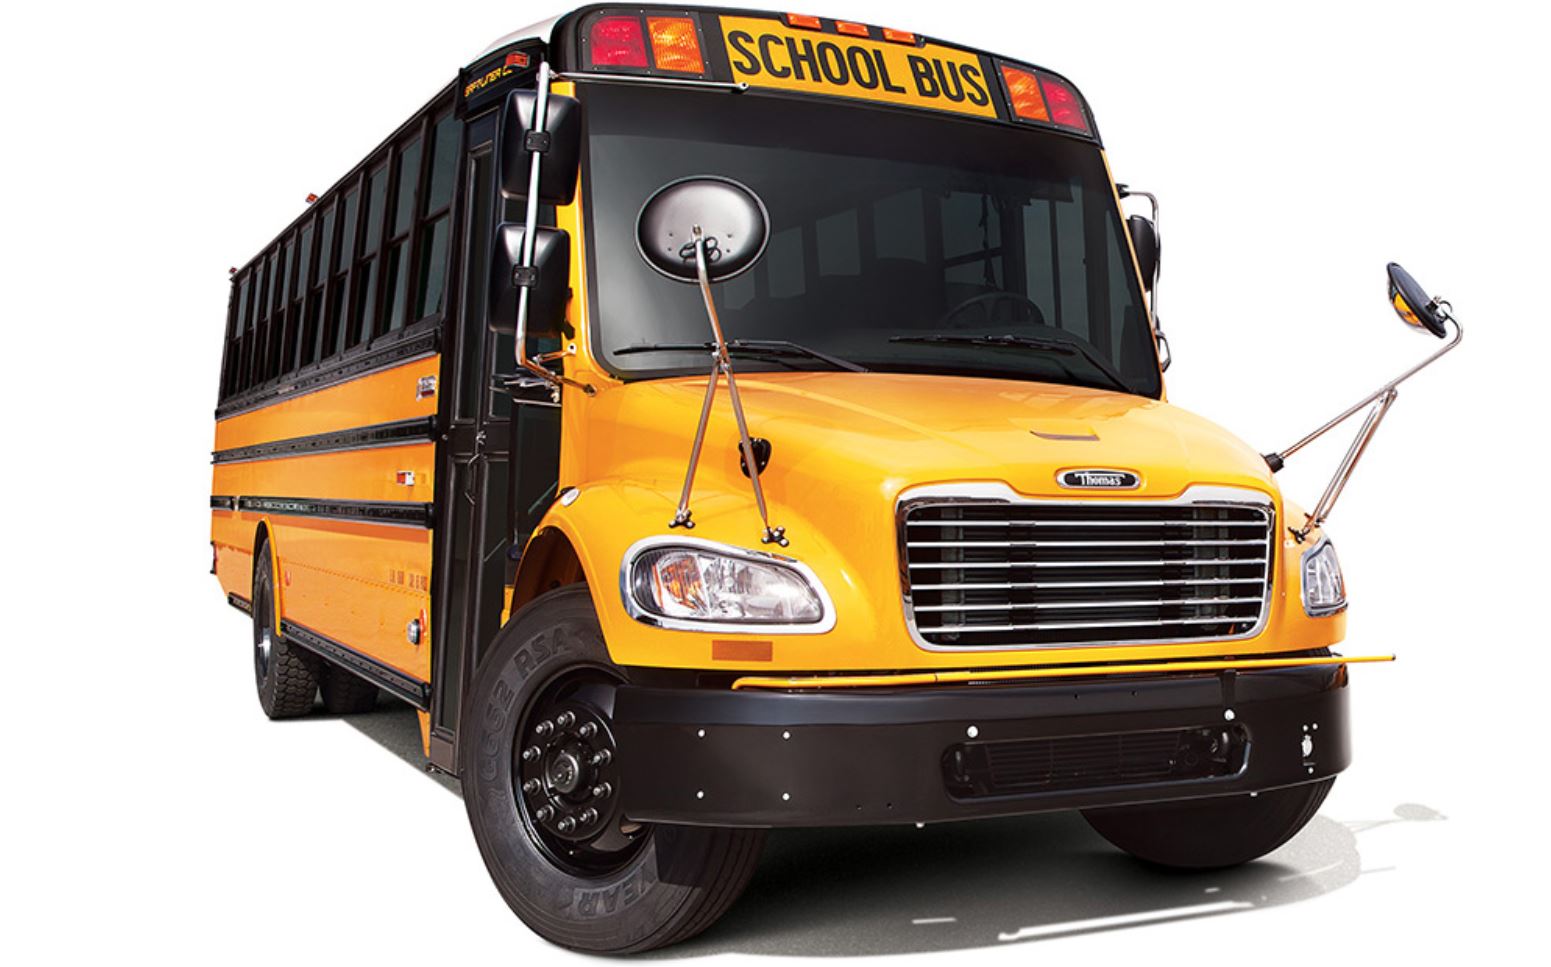 The yellow 2020 Safe-T-Liner school bus.